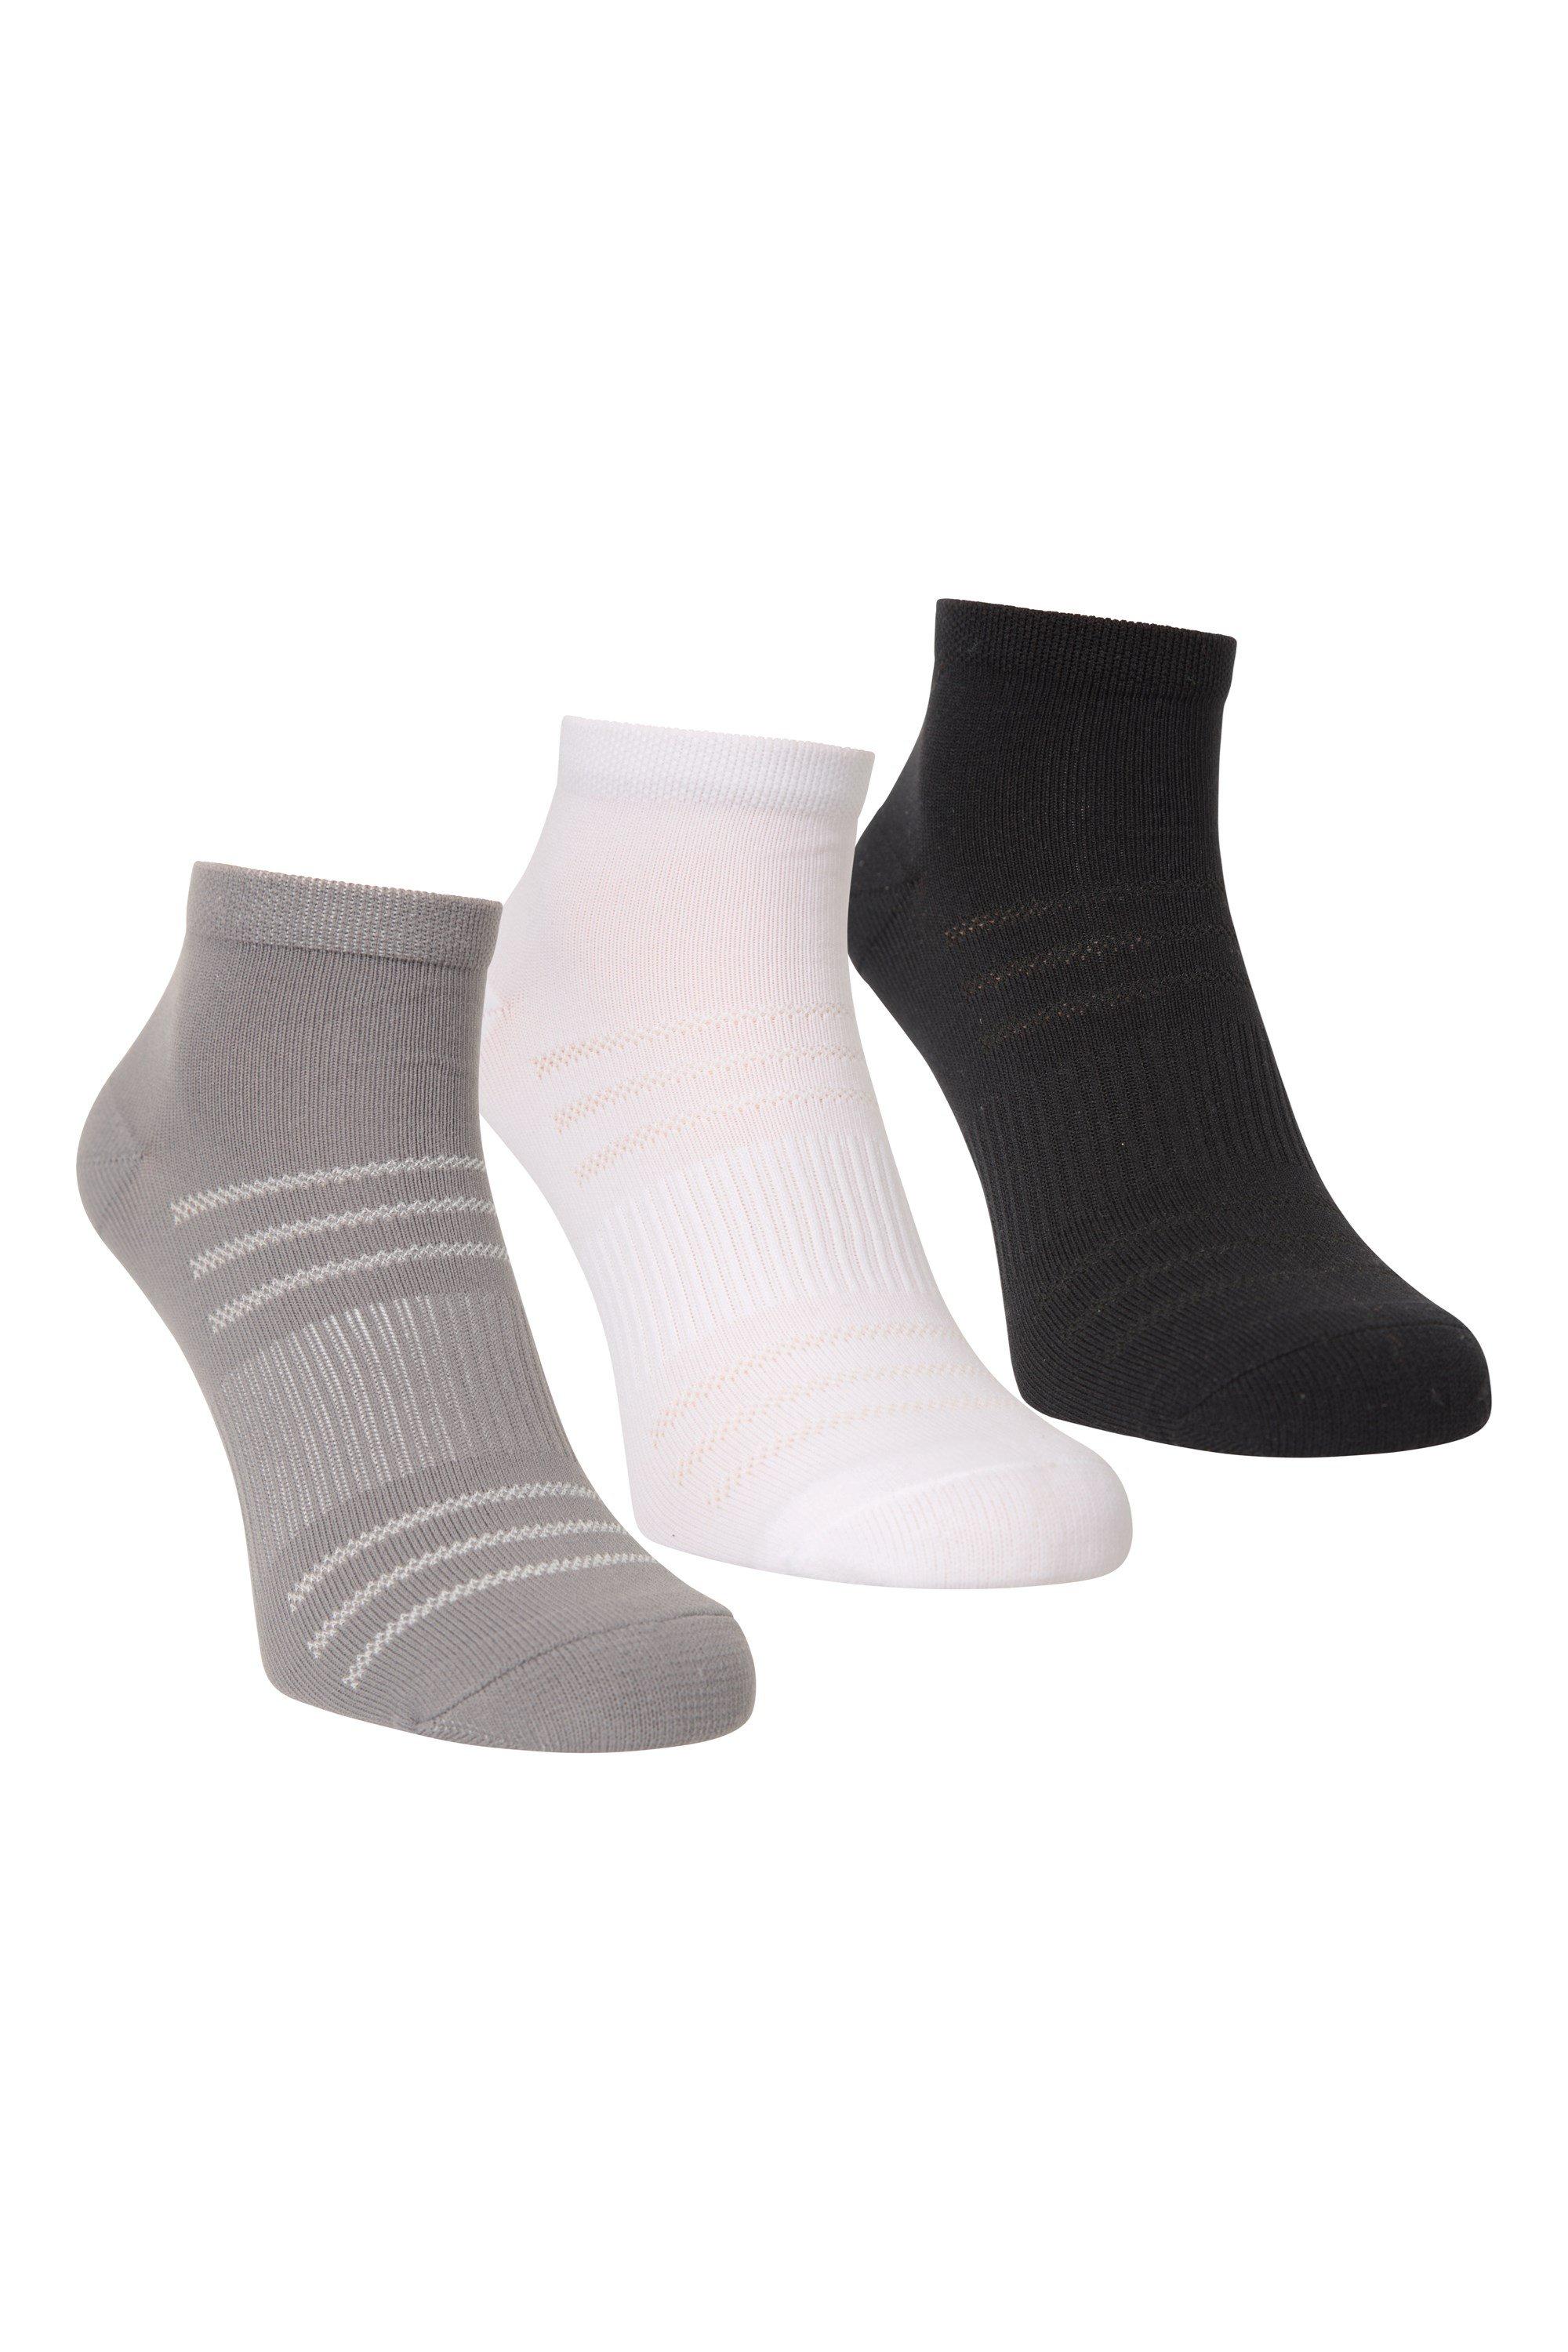 Trainer Socks Arch Support Warm Ankle Sock - Pack of 3